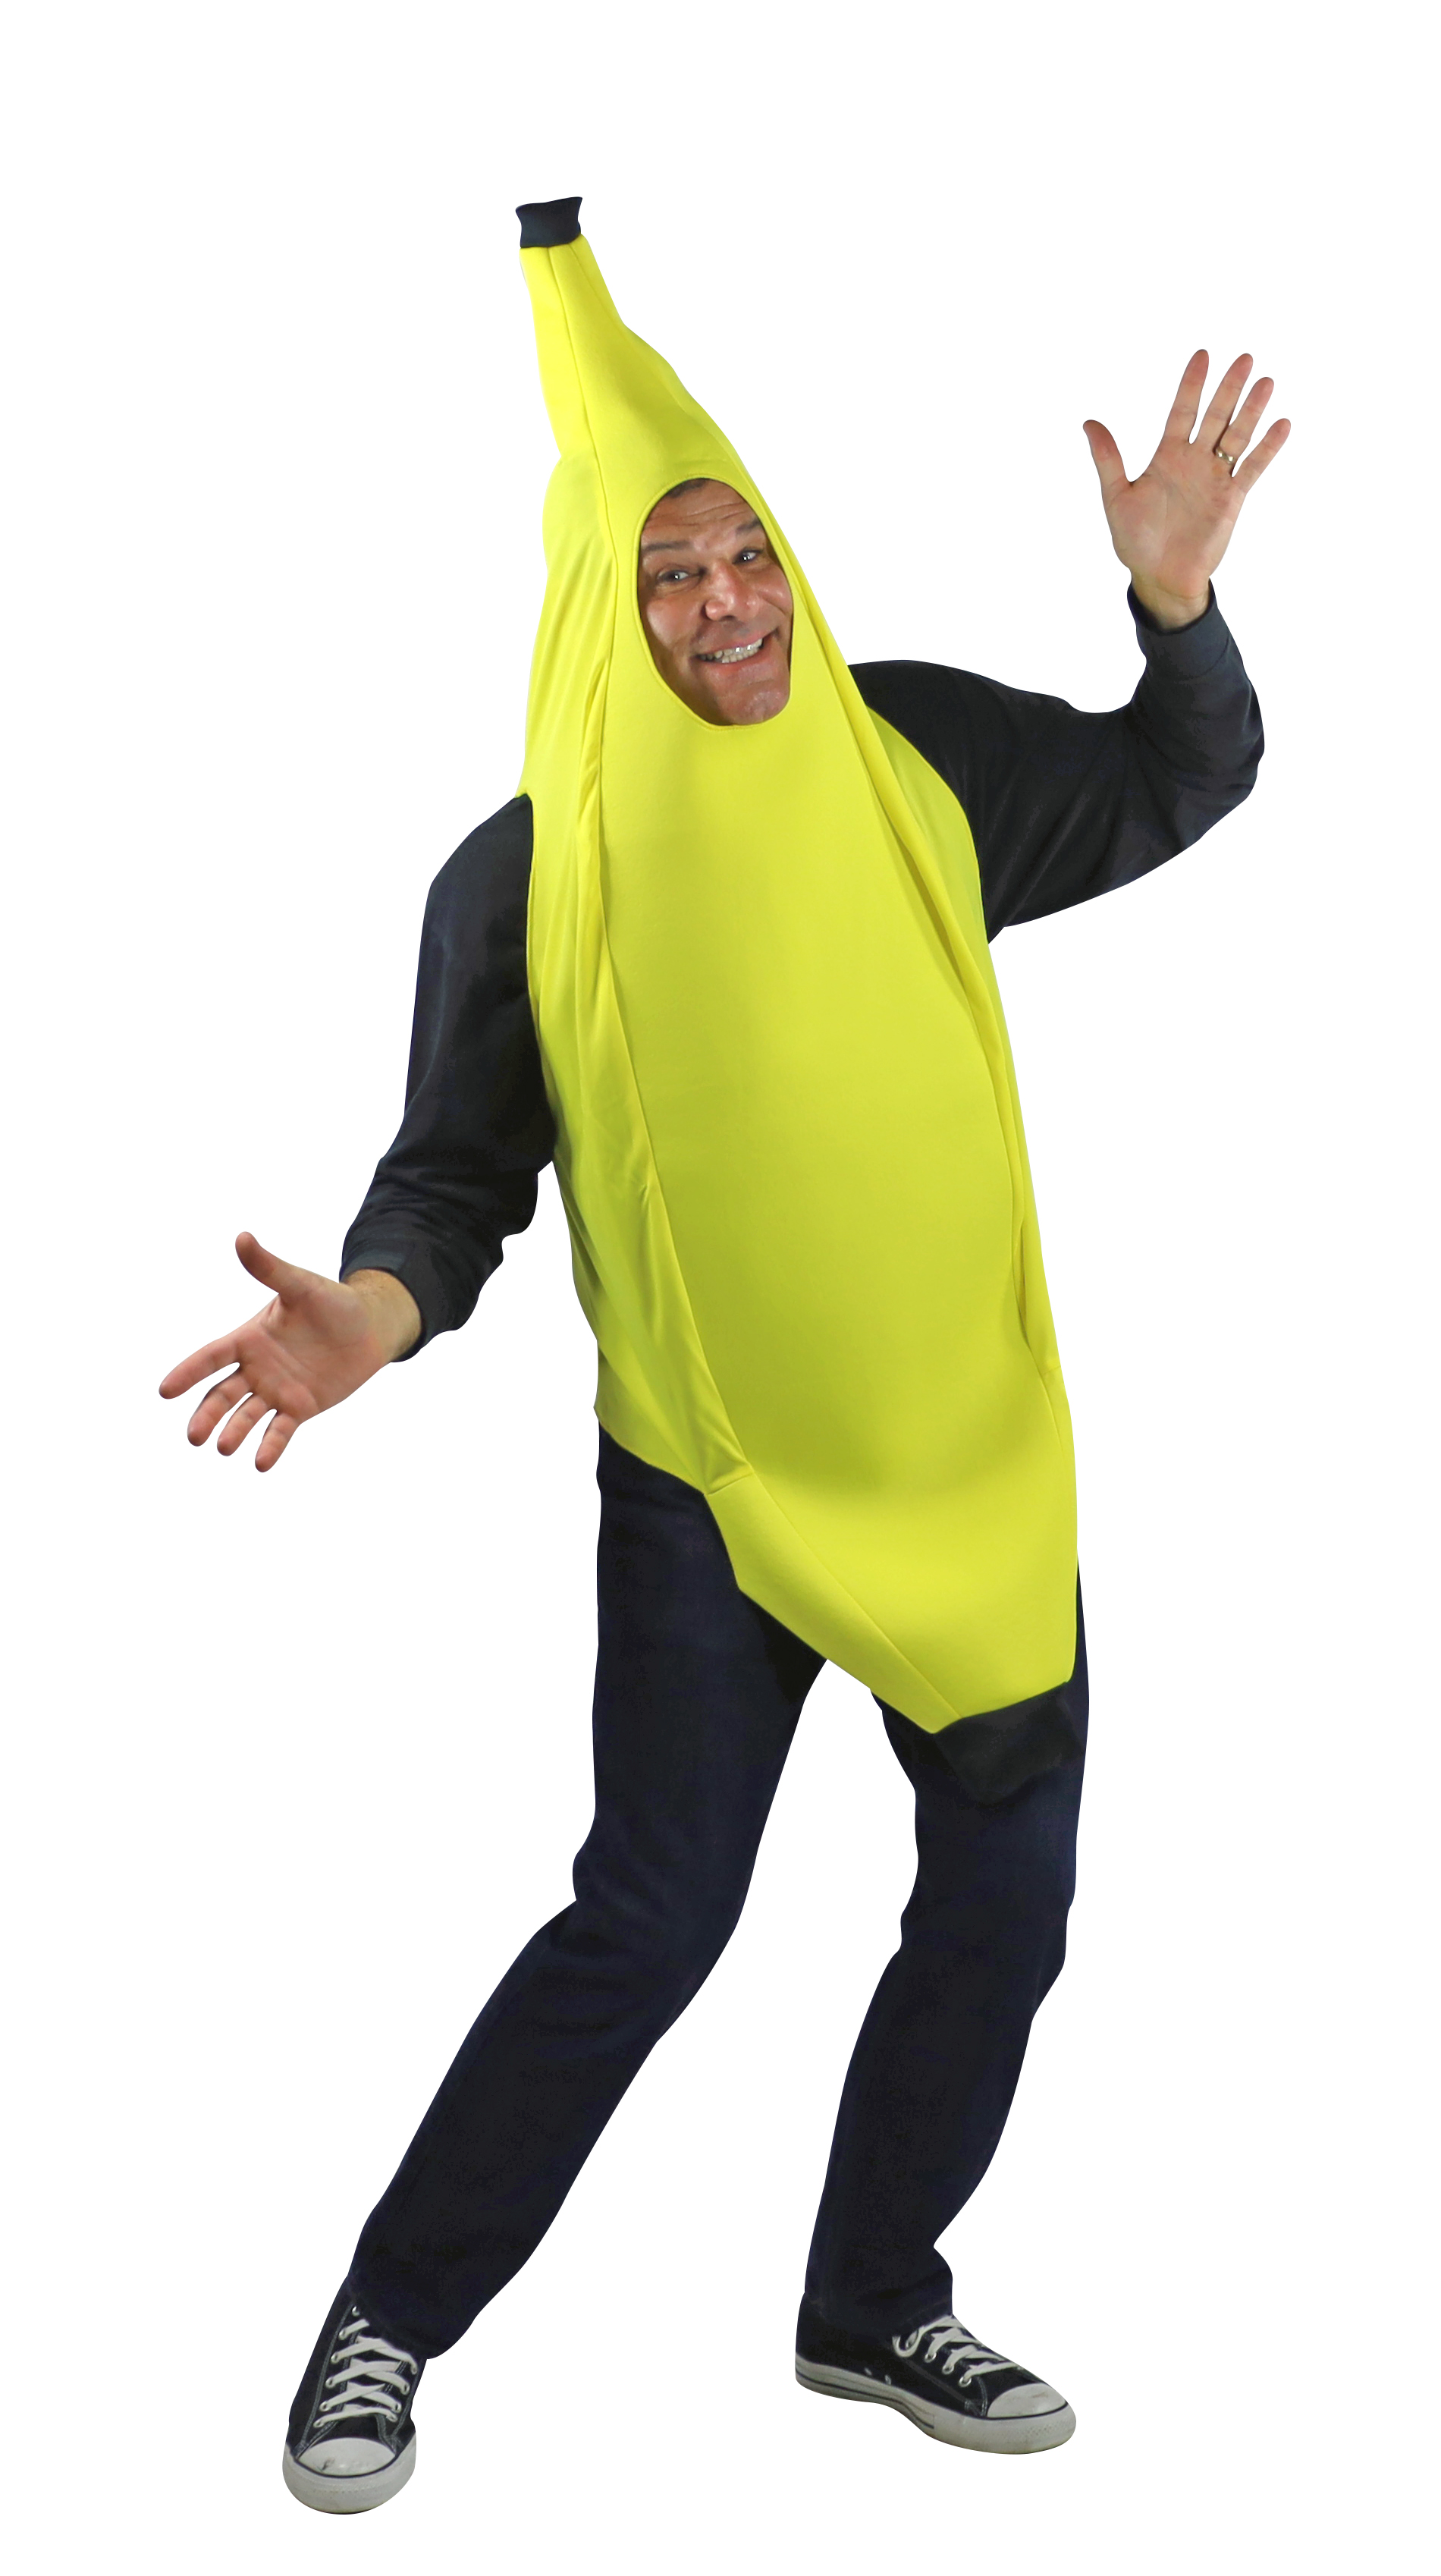 Banana Tunic Halloween Costume for Adults, Mens One Size Fit , by Rasta Imposta - image 3 of 5